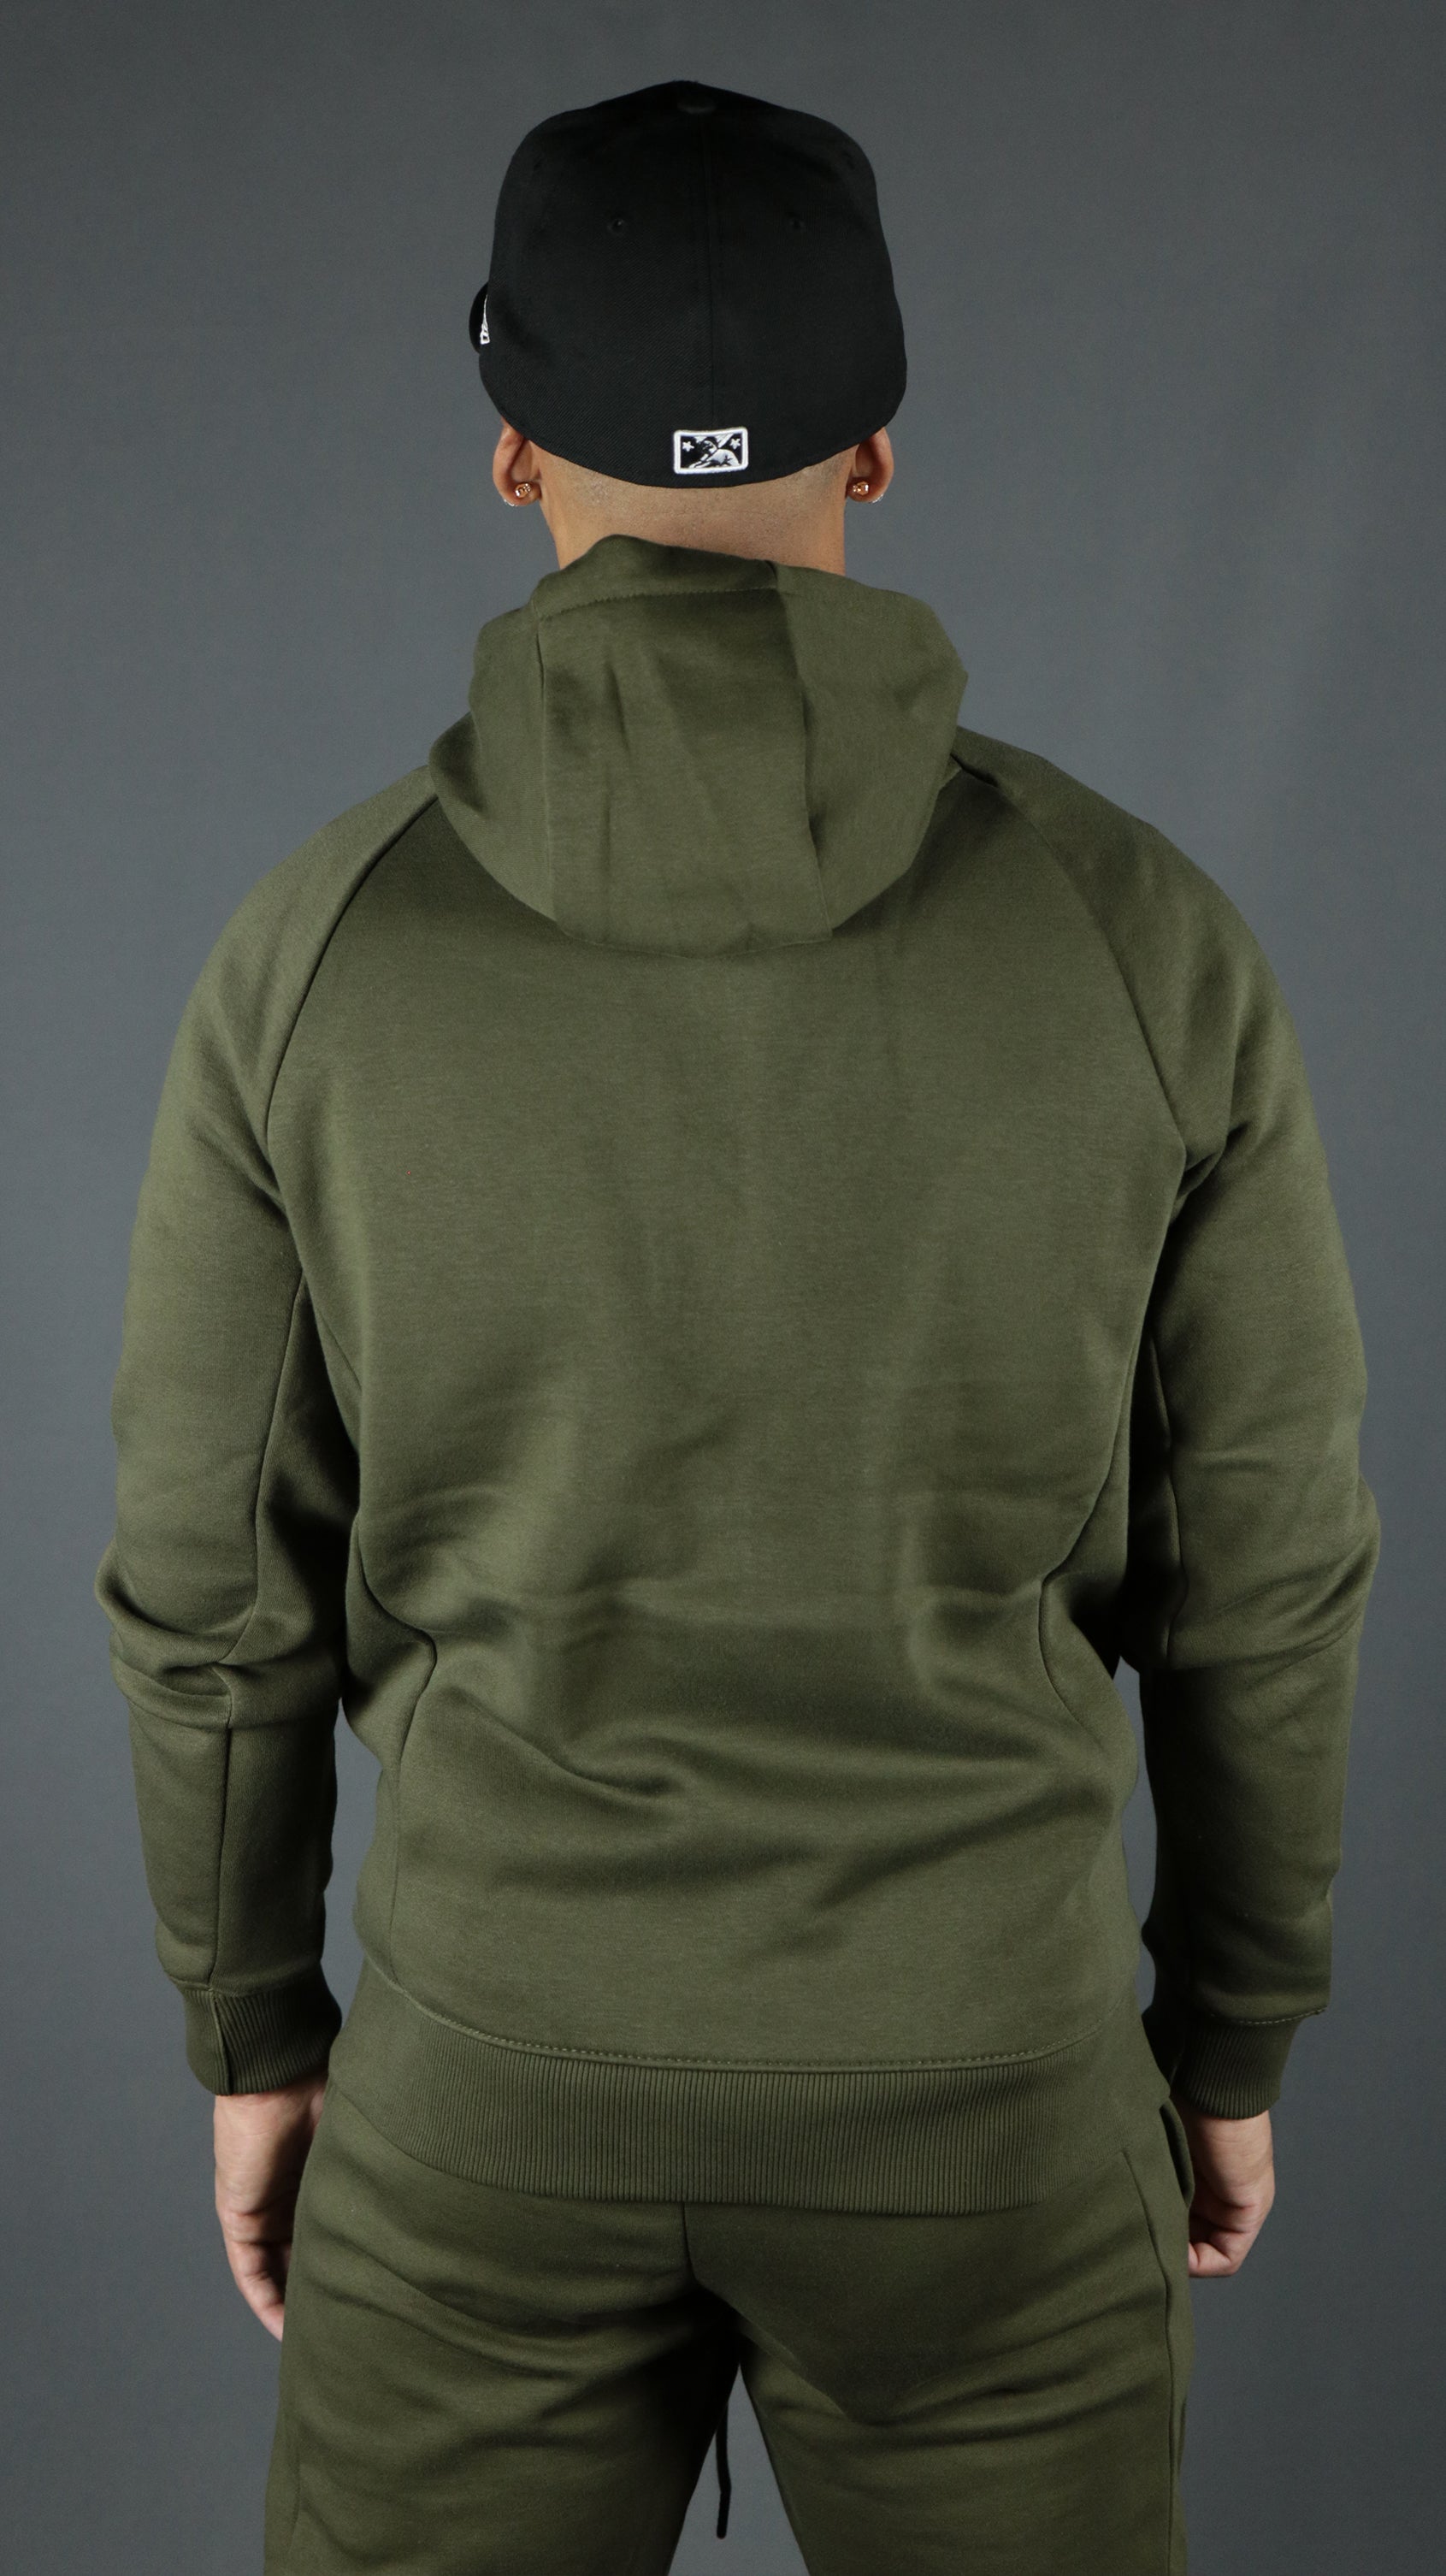 The olive military green Jordan Craig tech fleece hoodie from the back side.